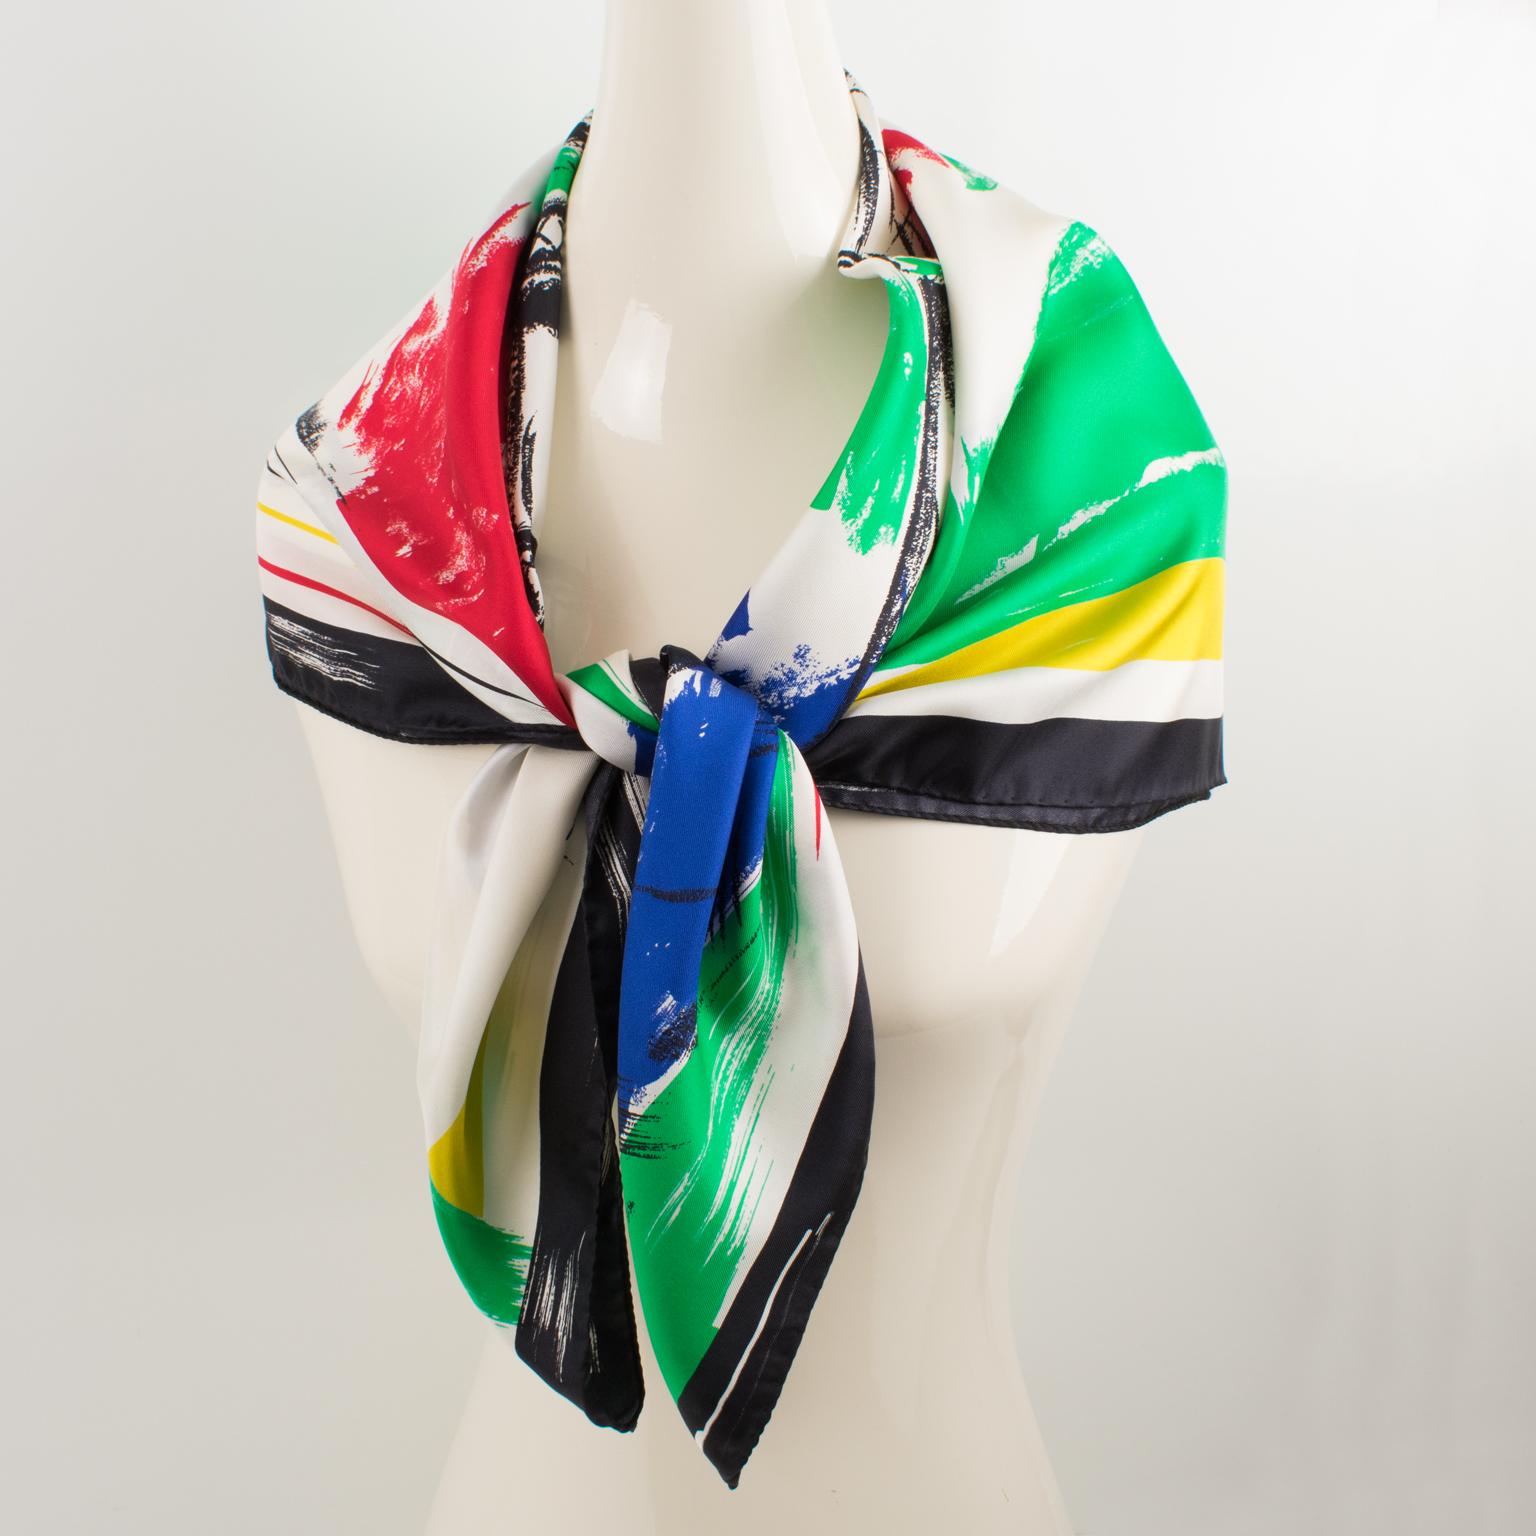 This beautiful silk scarf by Courreges in multicolor tones features the iconic Eiffel Tower design print. The signature on the bottom right corner reads 